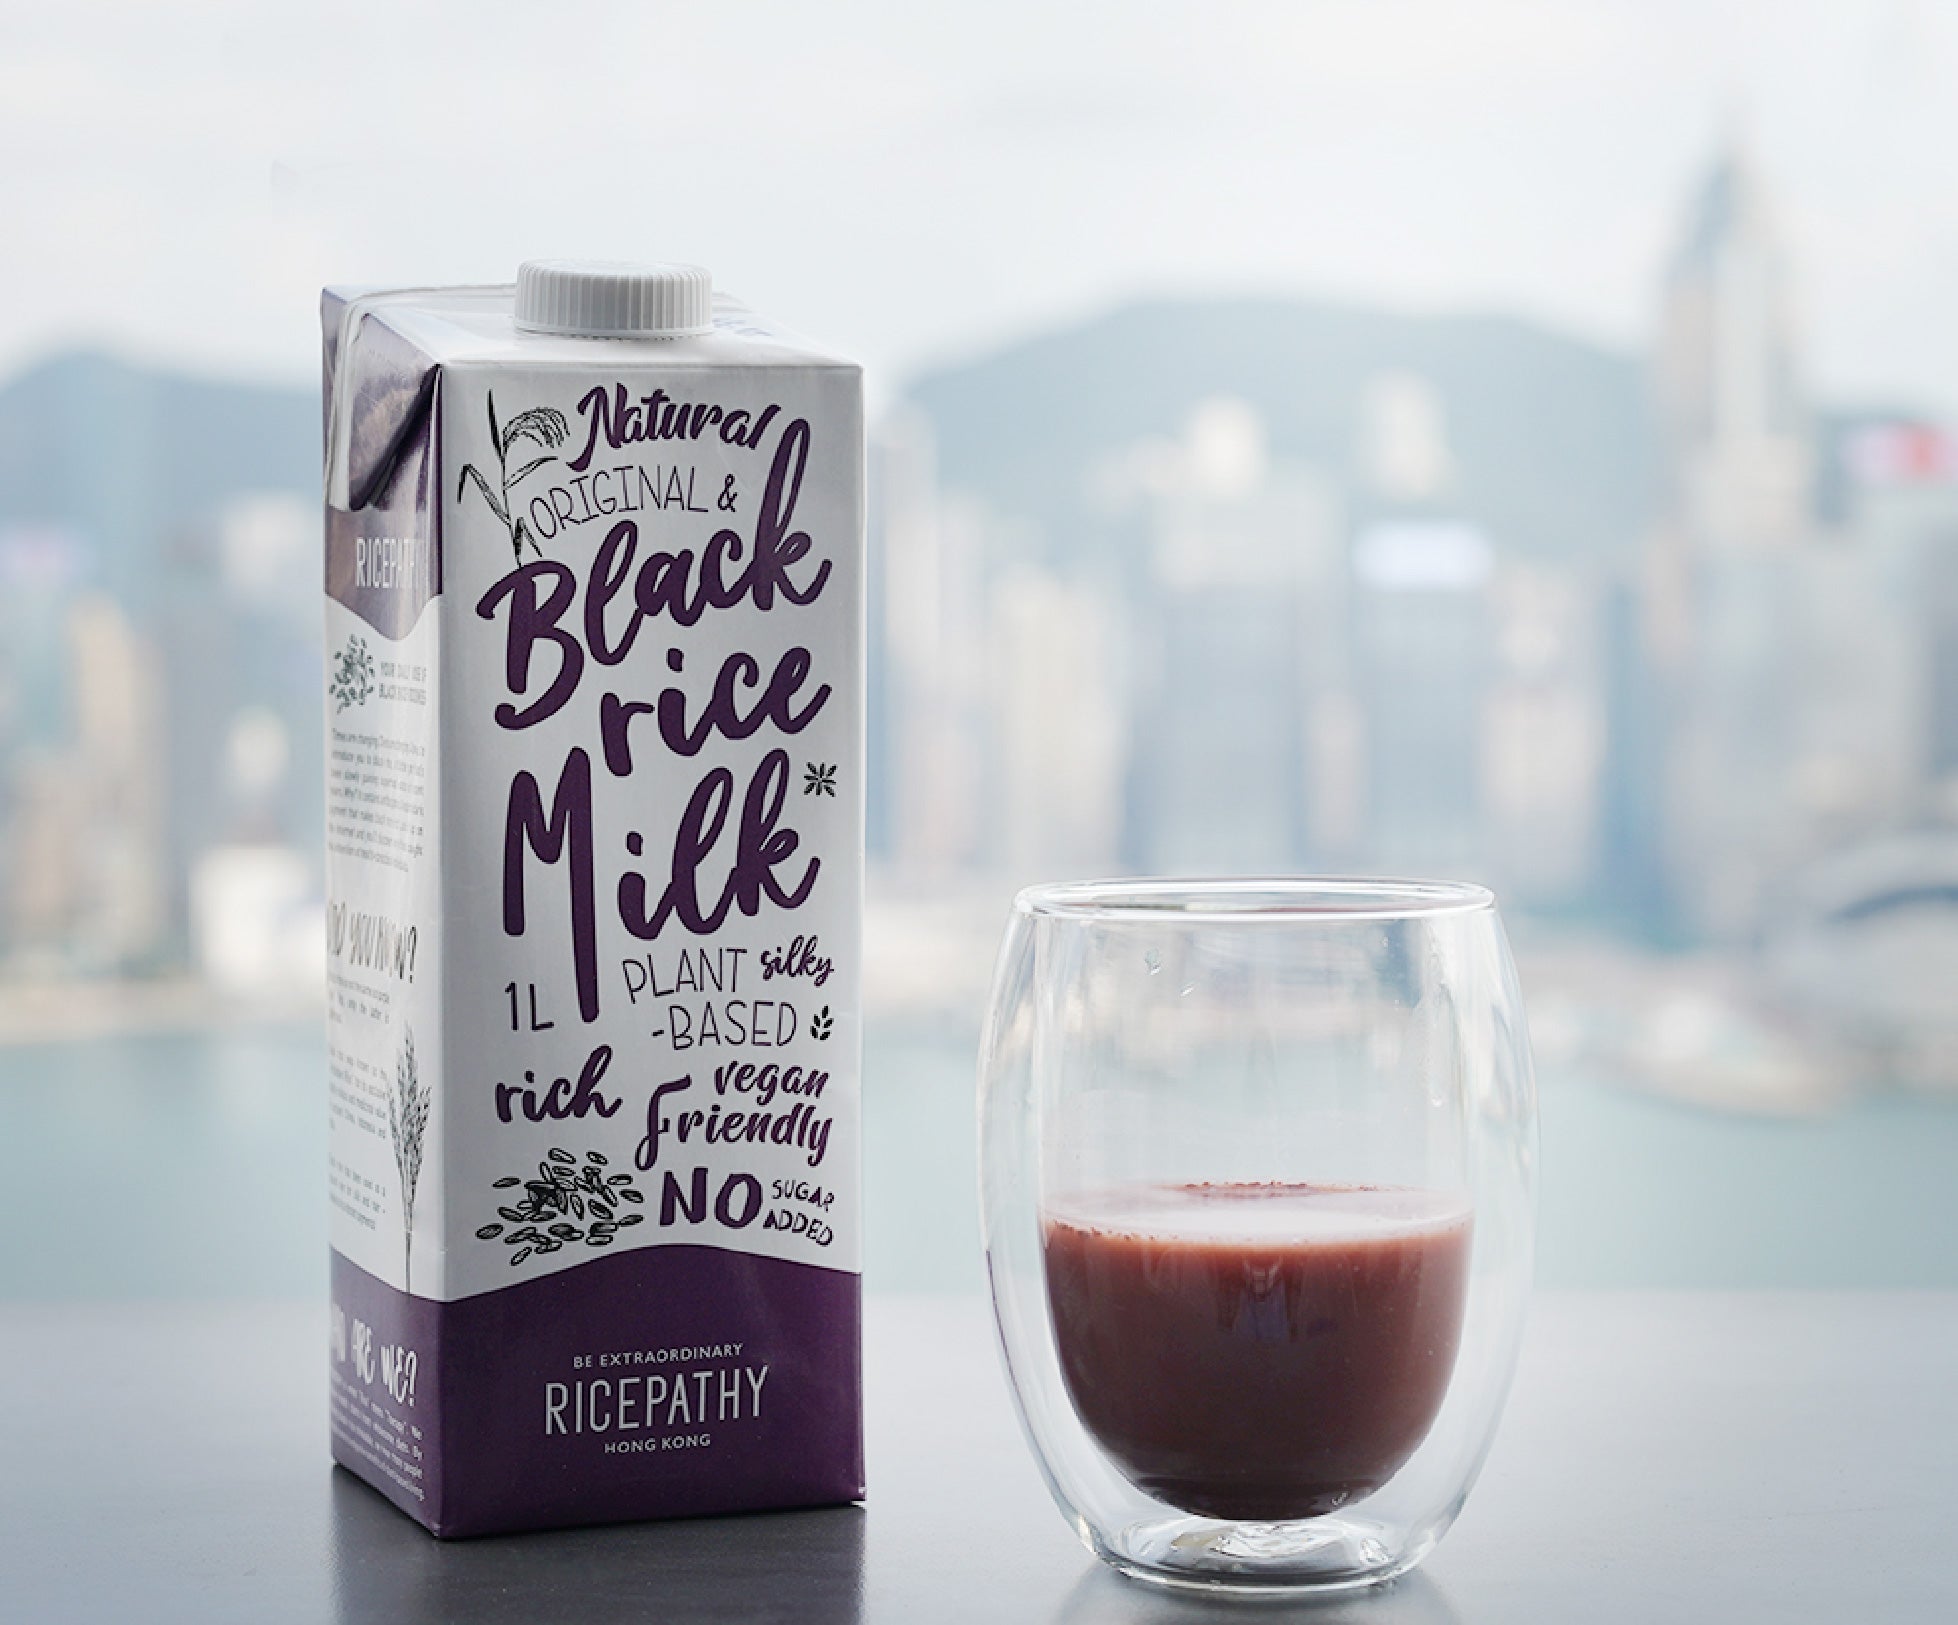 RICEPATHY black rice milk with Hong Kong harbour sea background